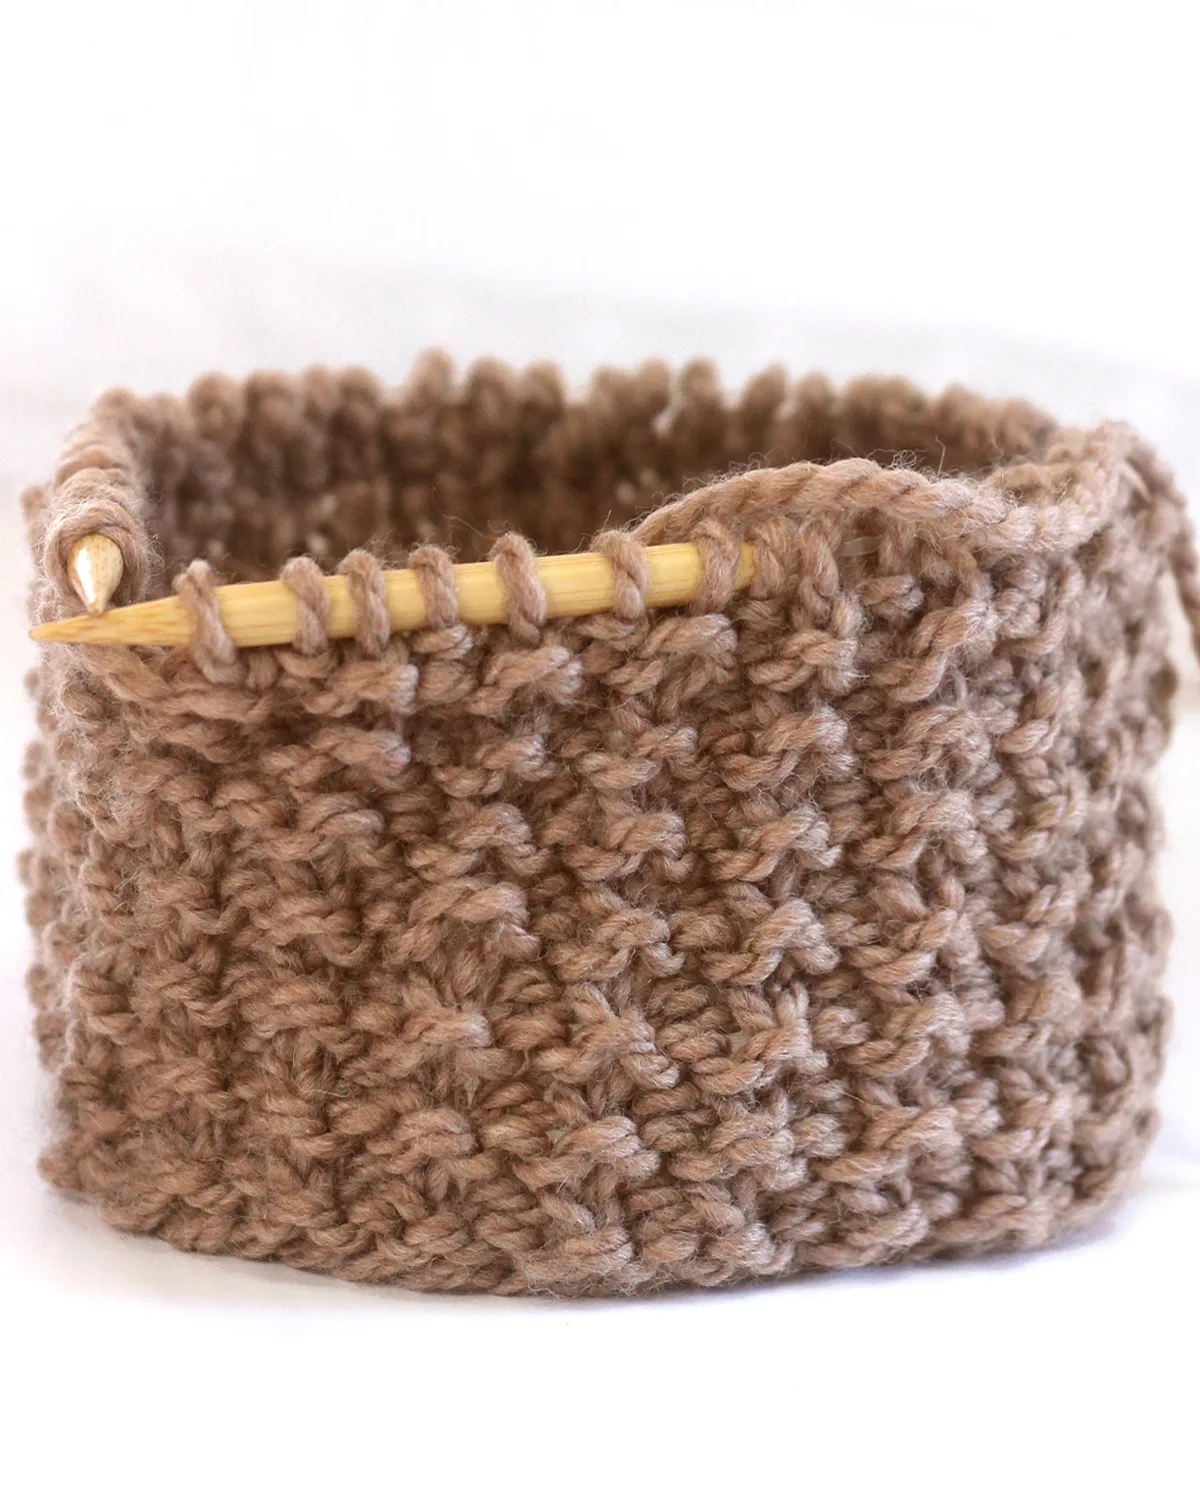 Sand stitch knitting texture on circular bamboo needles with light brown colored yarn.